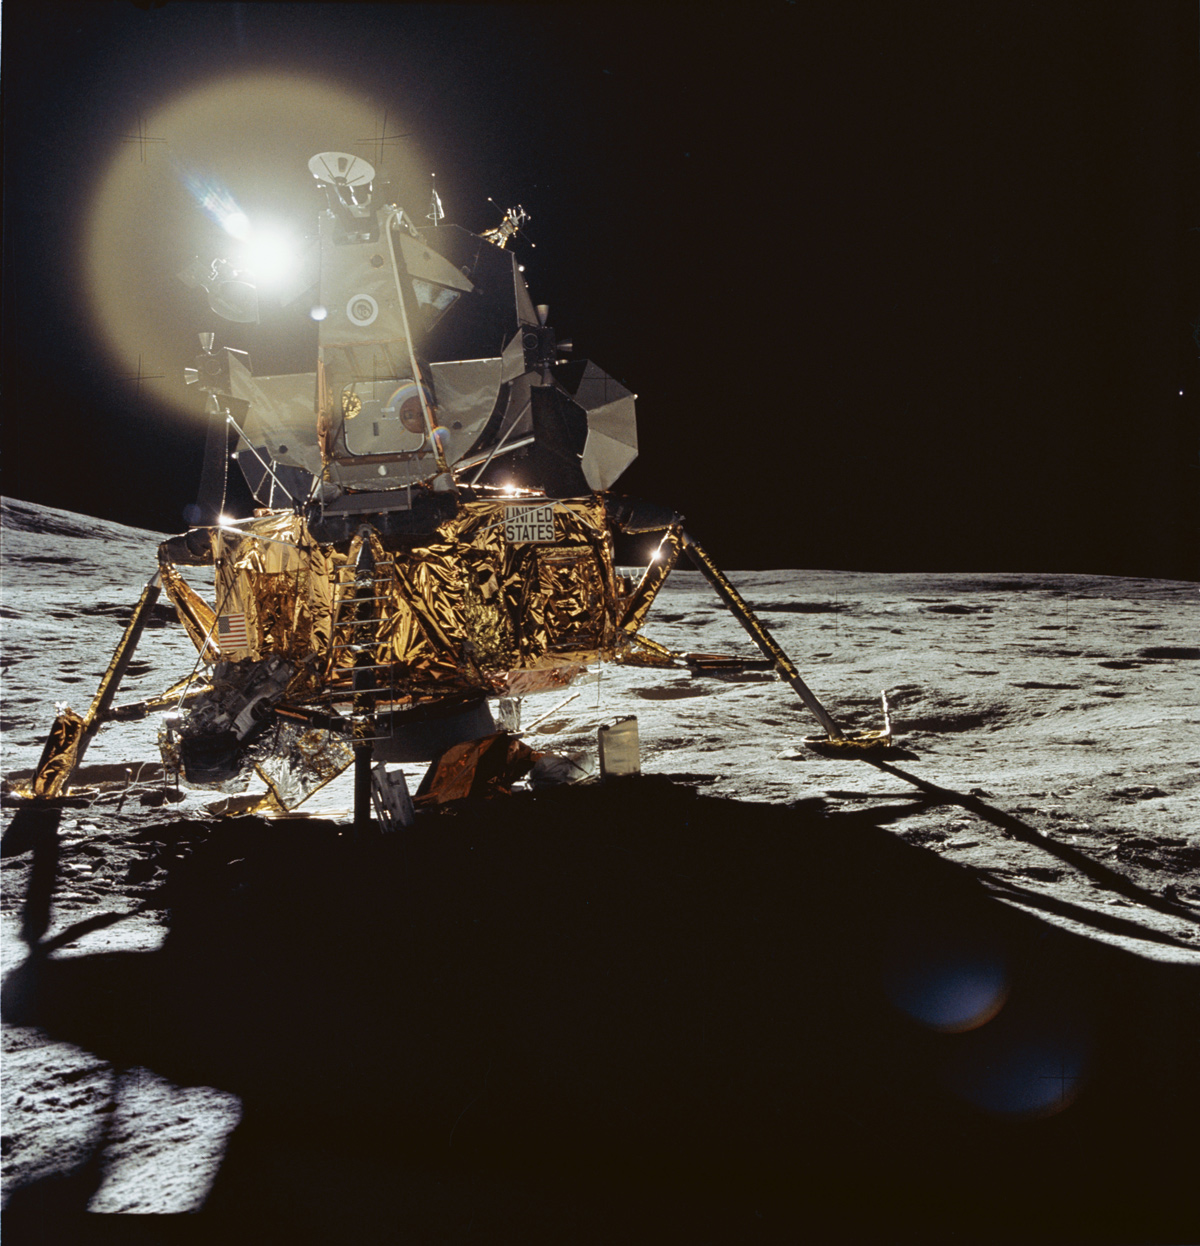 Lunar module on the moon, backlit, casting a deep shadow towards the viewer